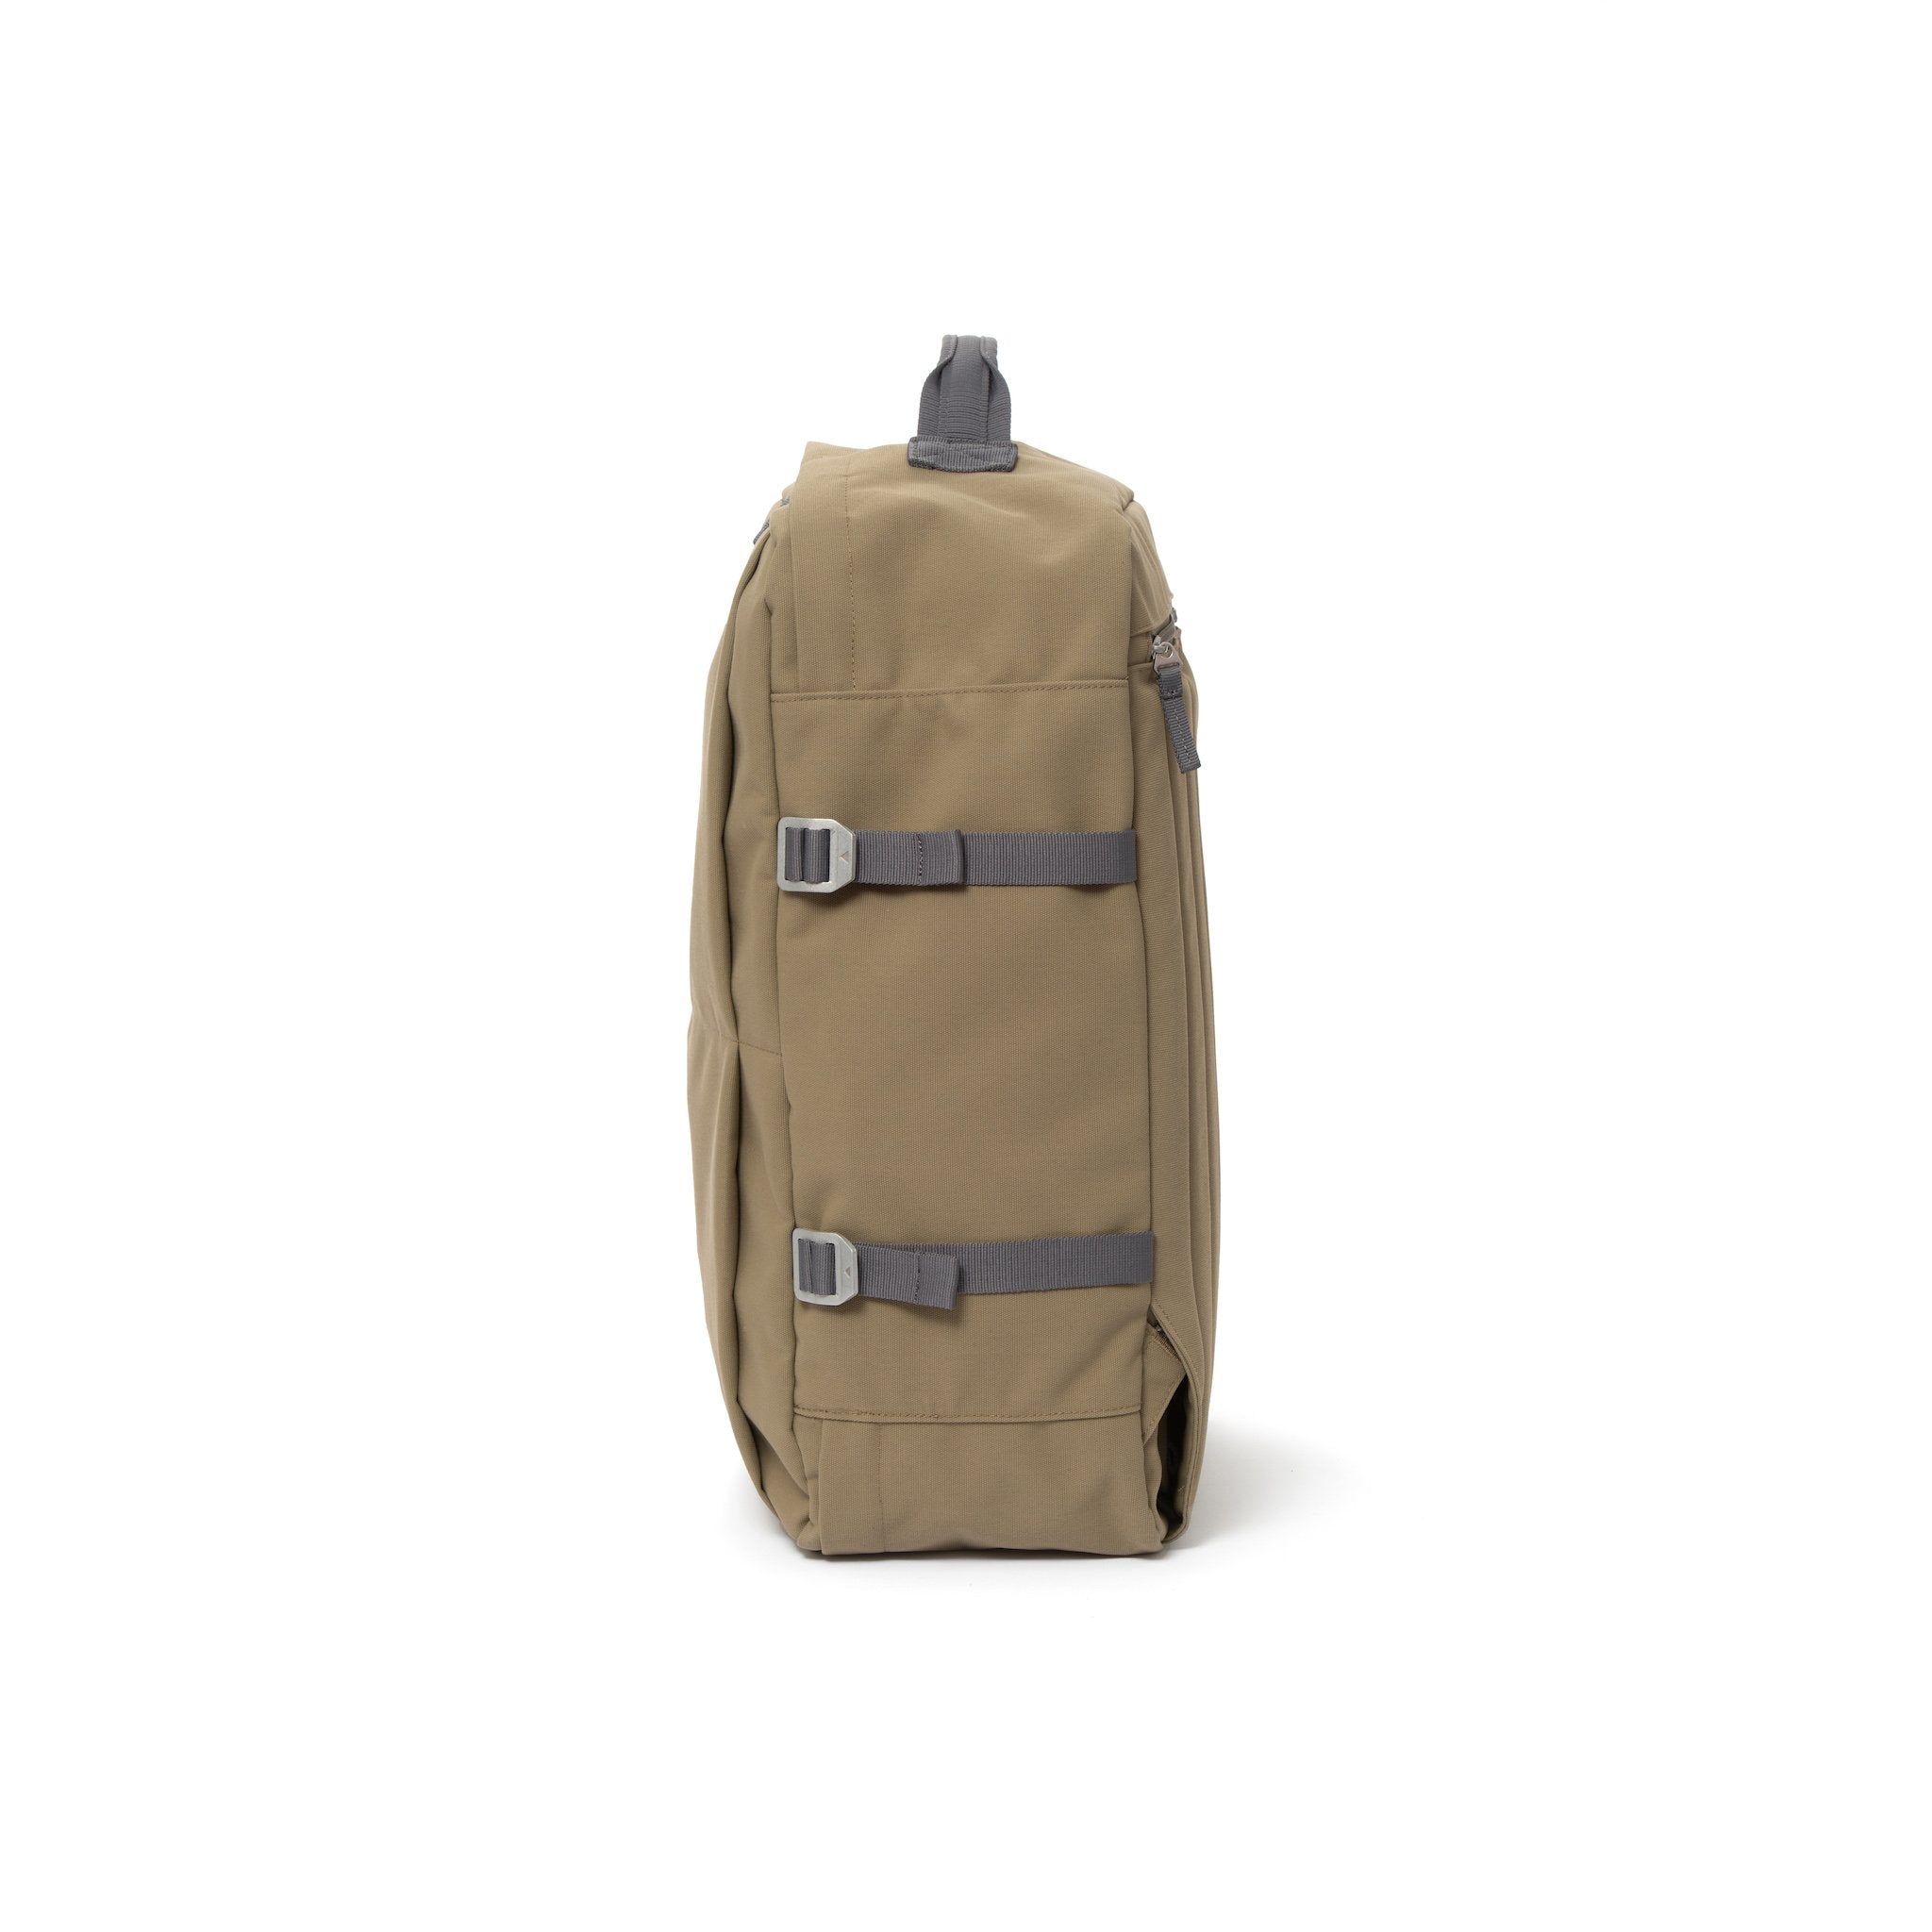 Khaki waterproof canvas travel backpack with compression side straps.